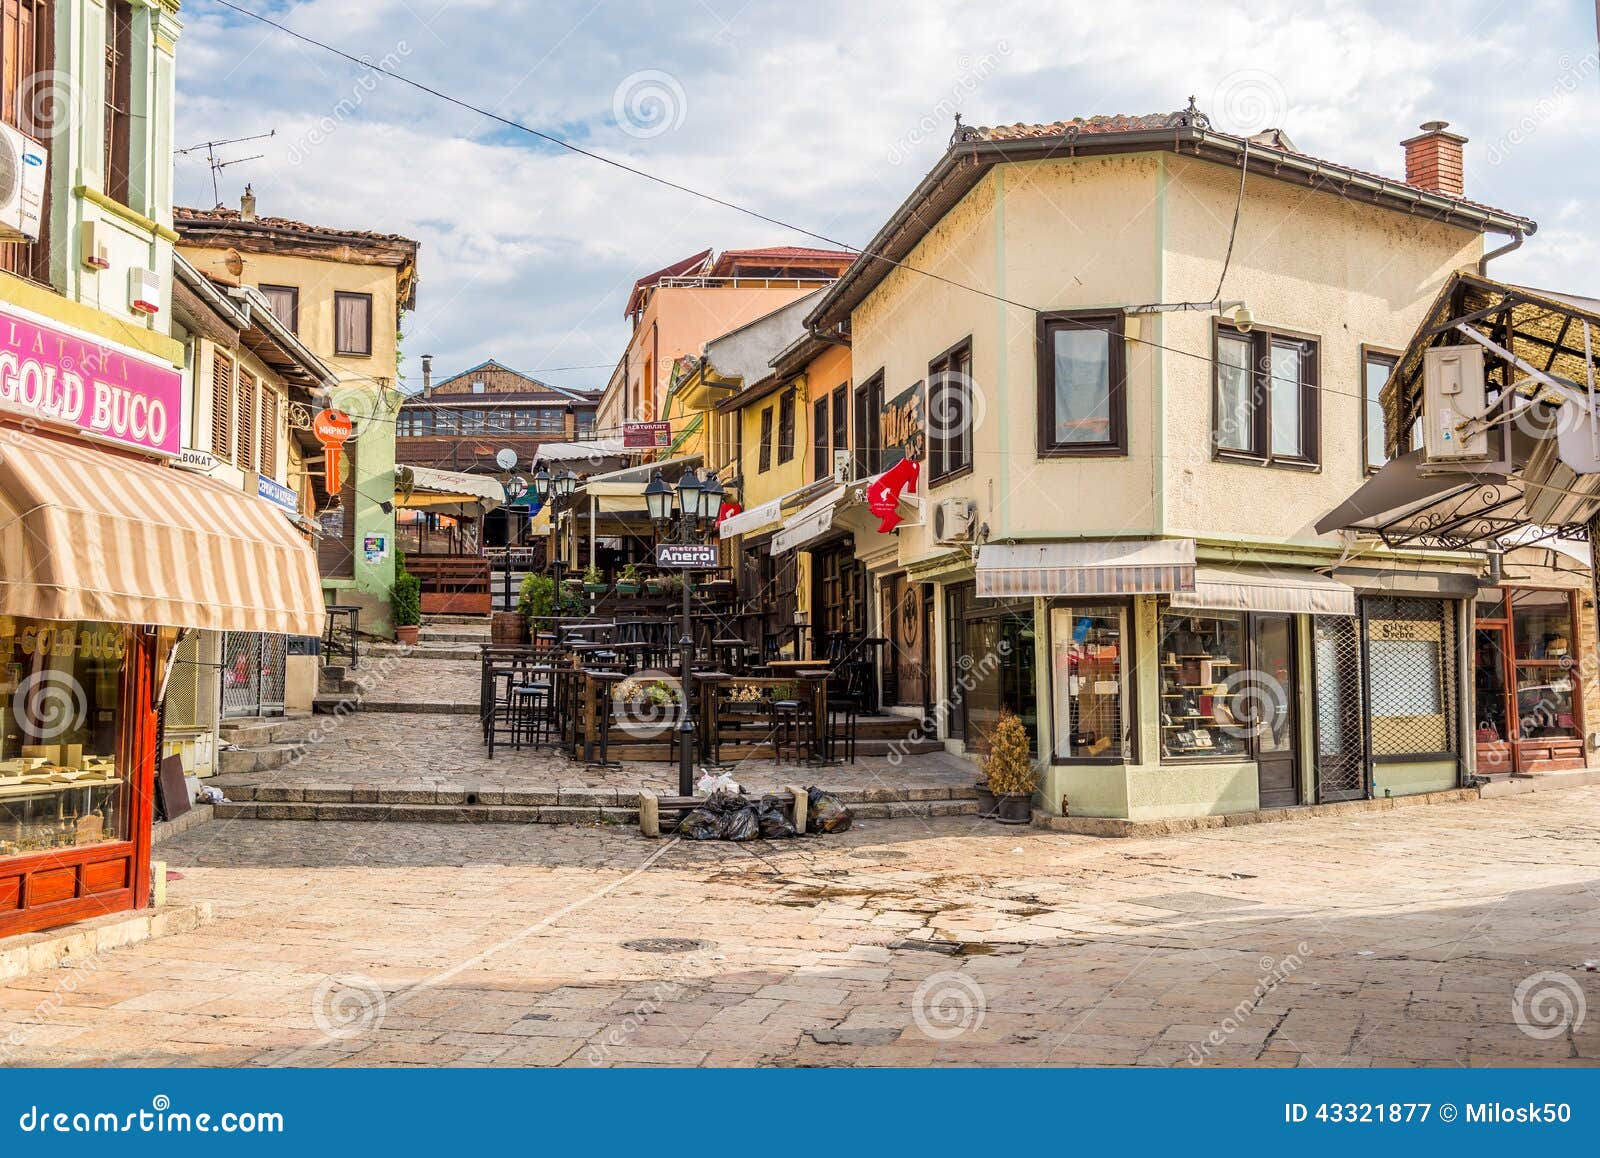 In the Streets Old Bazaar of City Skopje Editorial Photography - Image ...